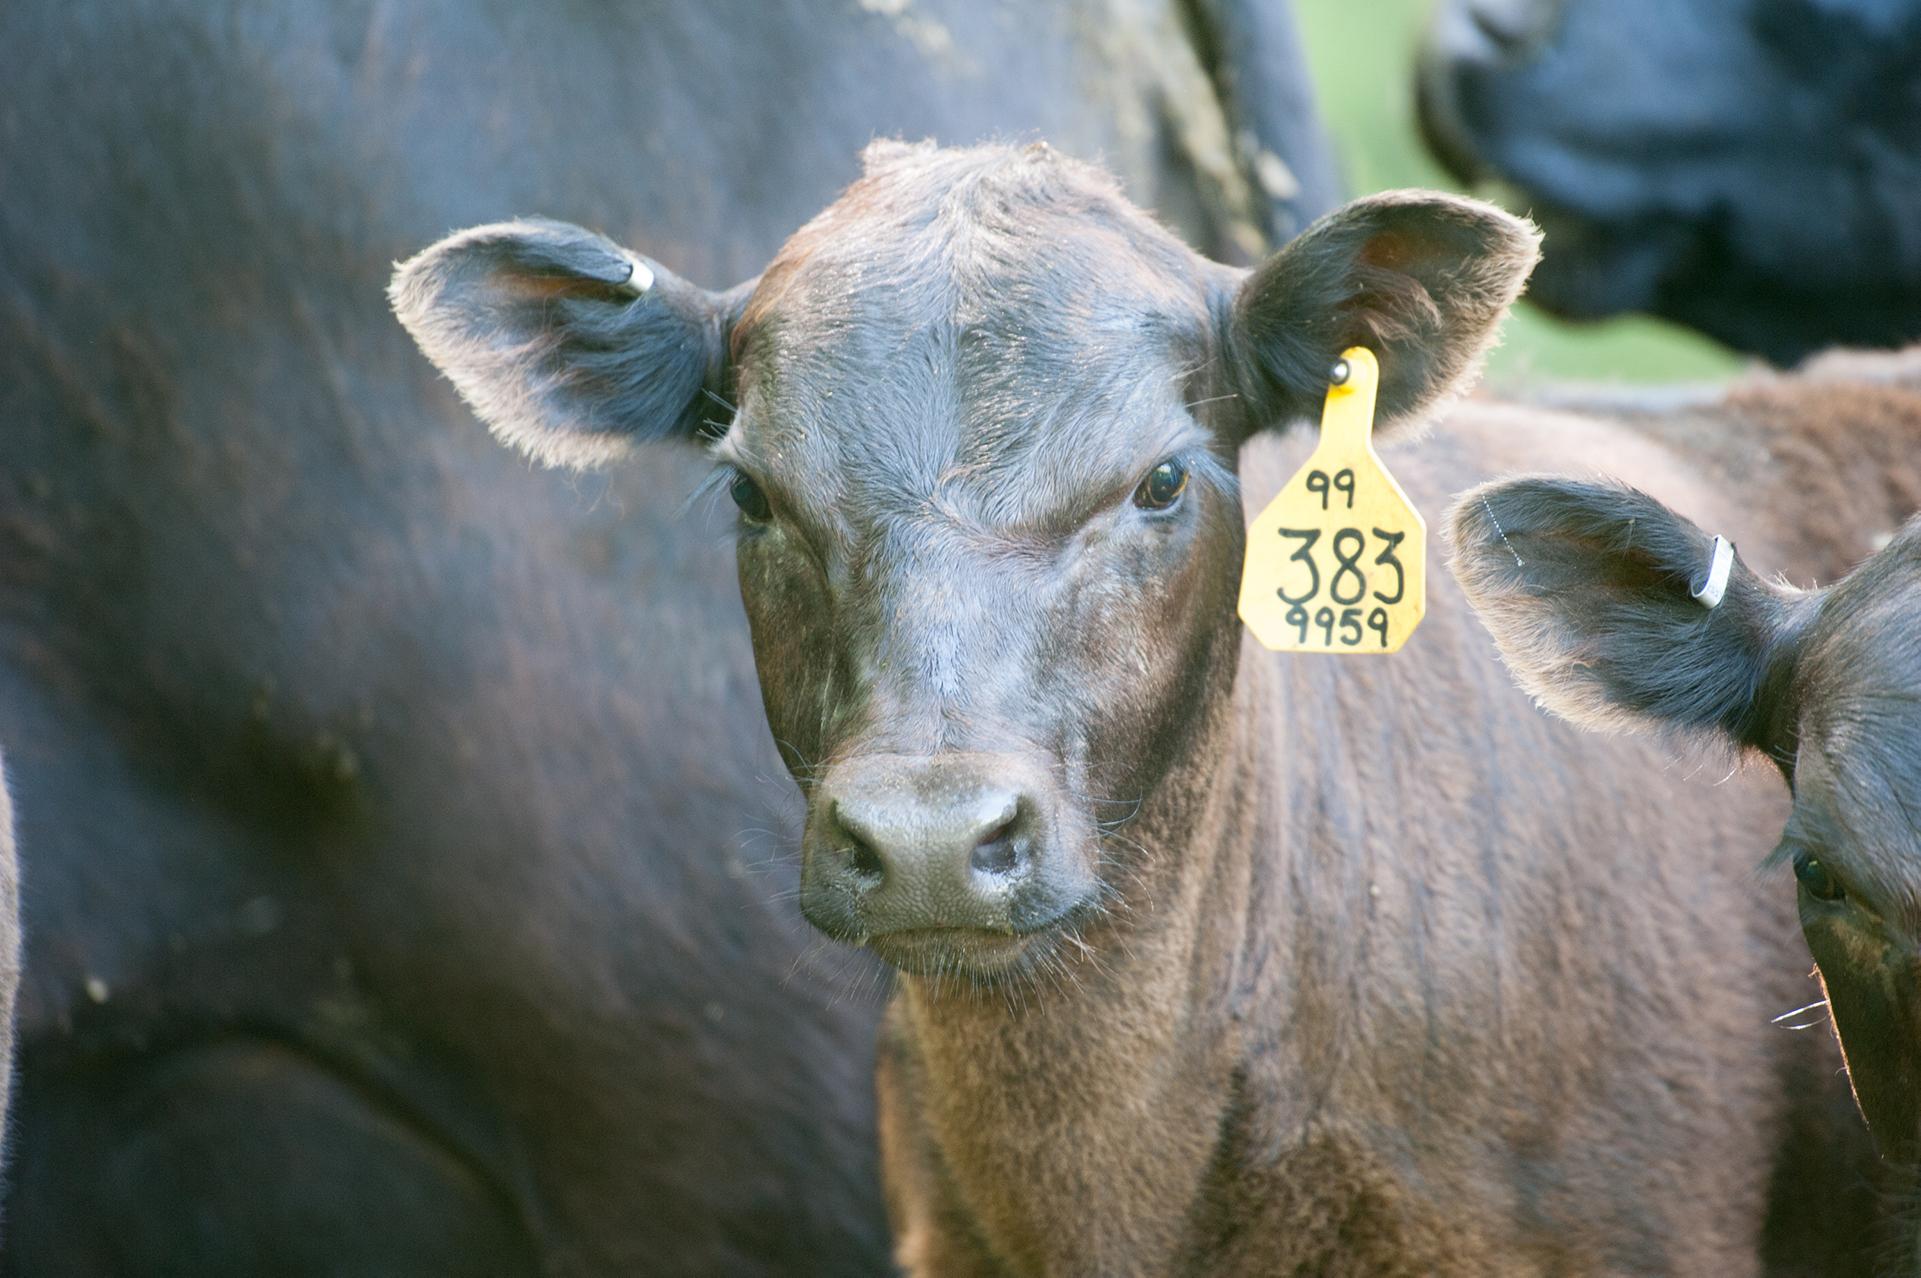 Dark brown calf with yellow tag on right ear